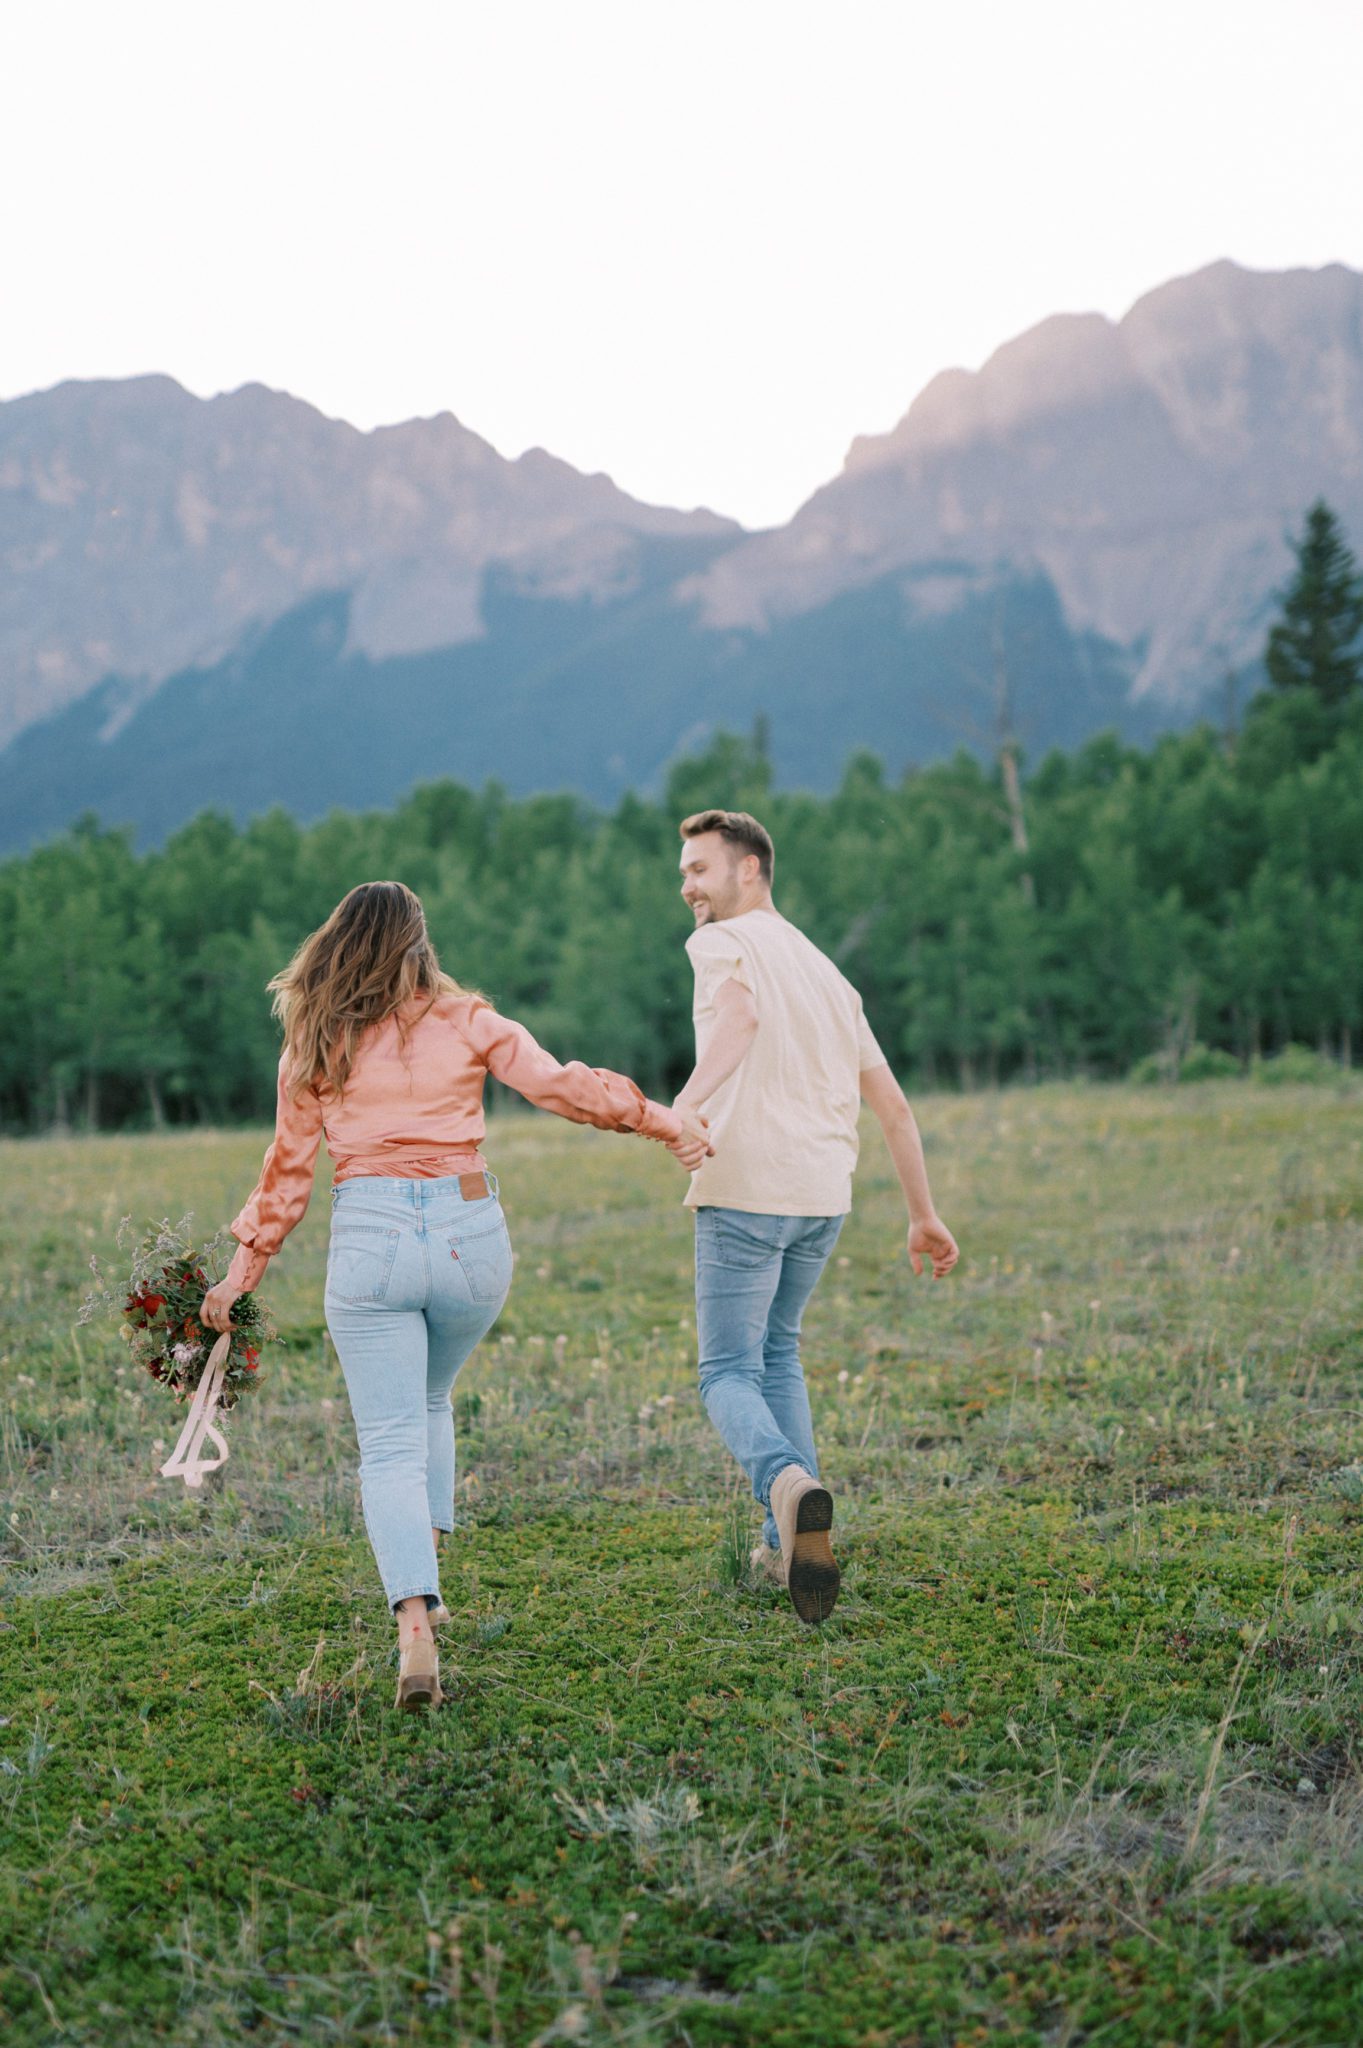 Couple frolicking in the mountains with a vibrant bouquet of flowers